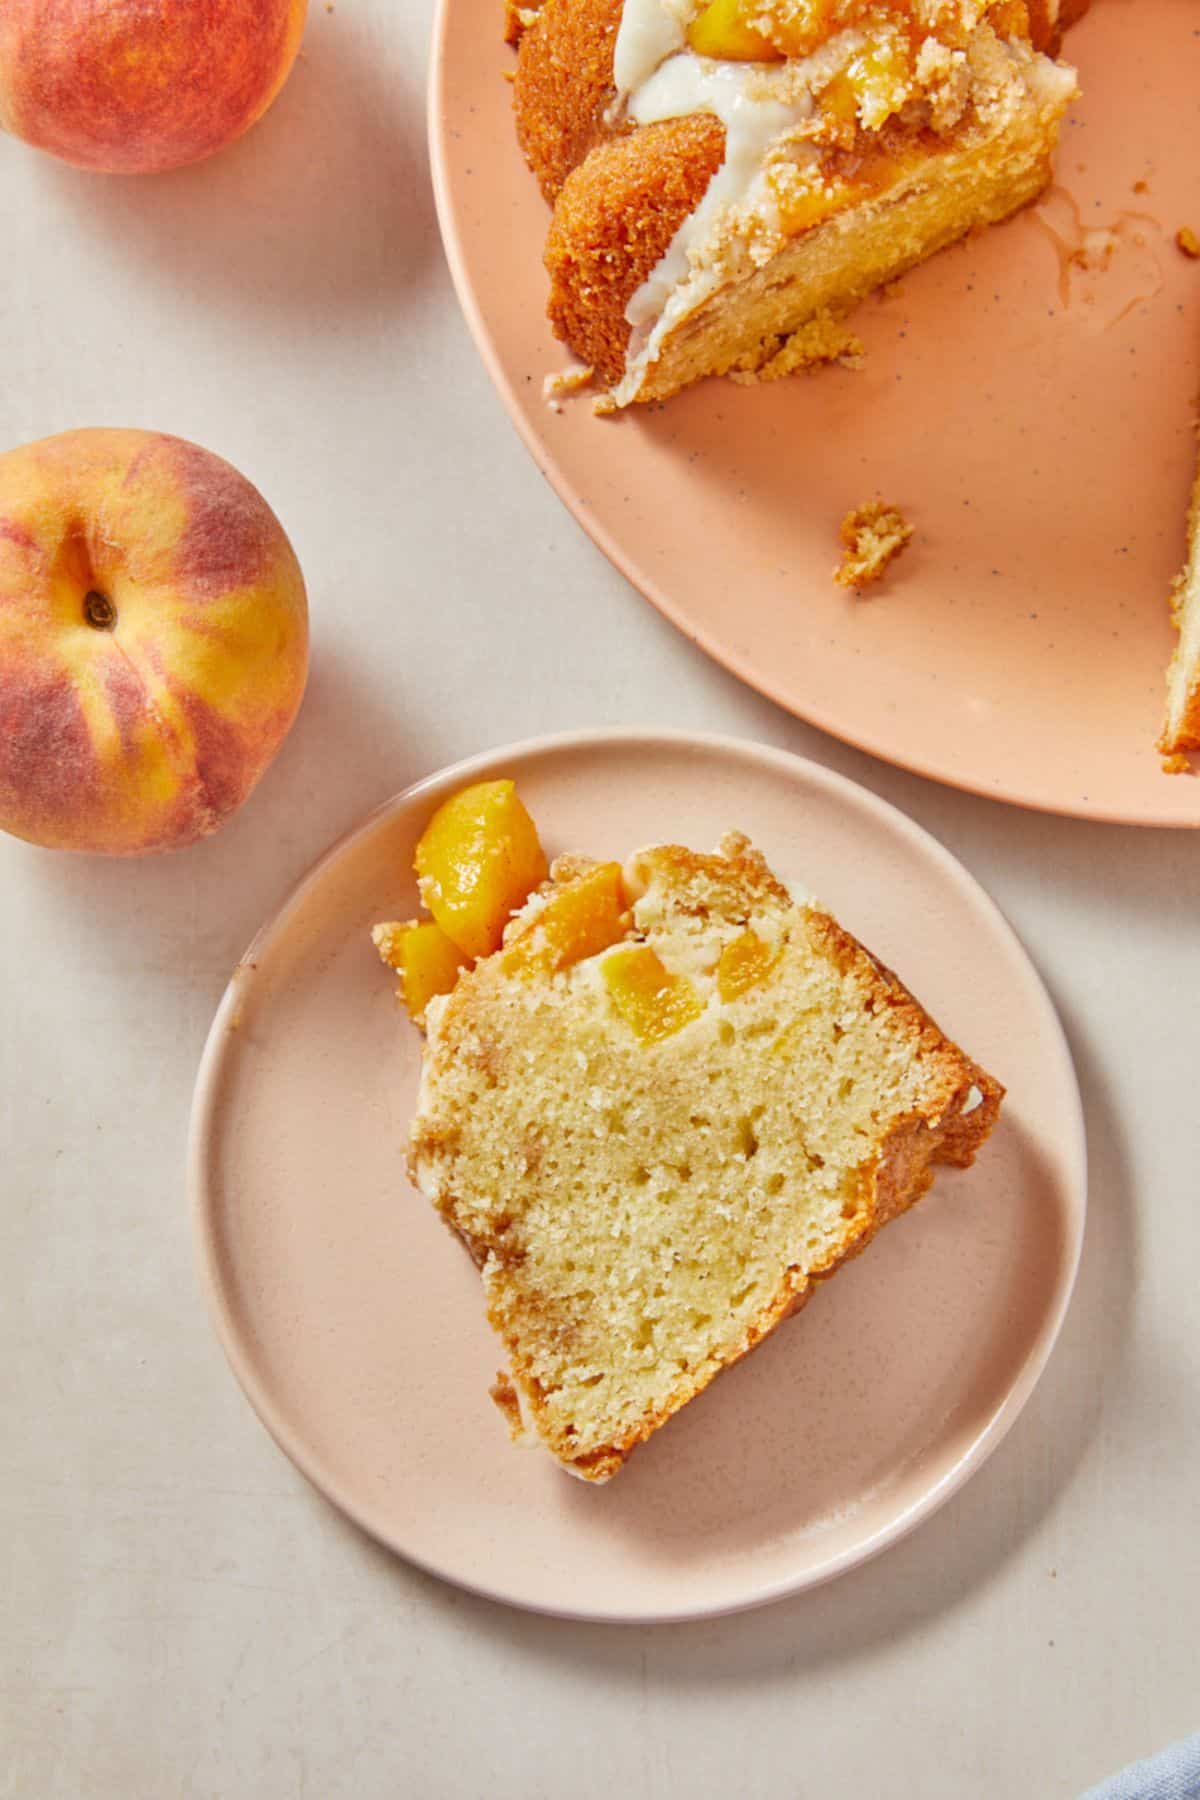 A slice of peach cobbler pound cake on a pink plate, showing its moist texture and peach pieces on top, with a whole peach beside it and a plate with more cake behind it